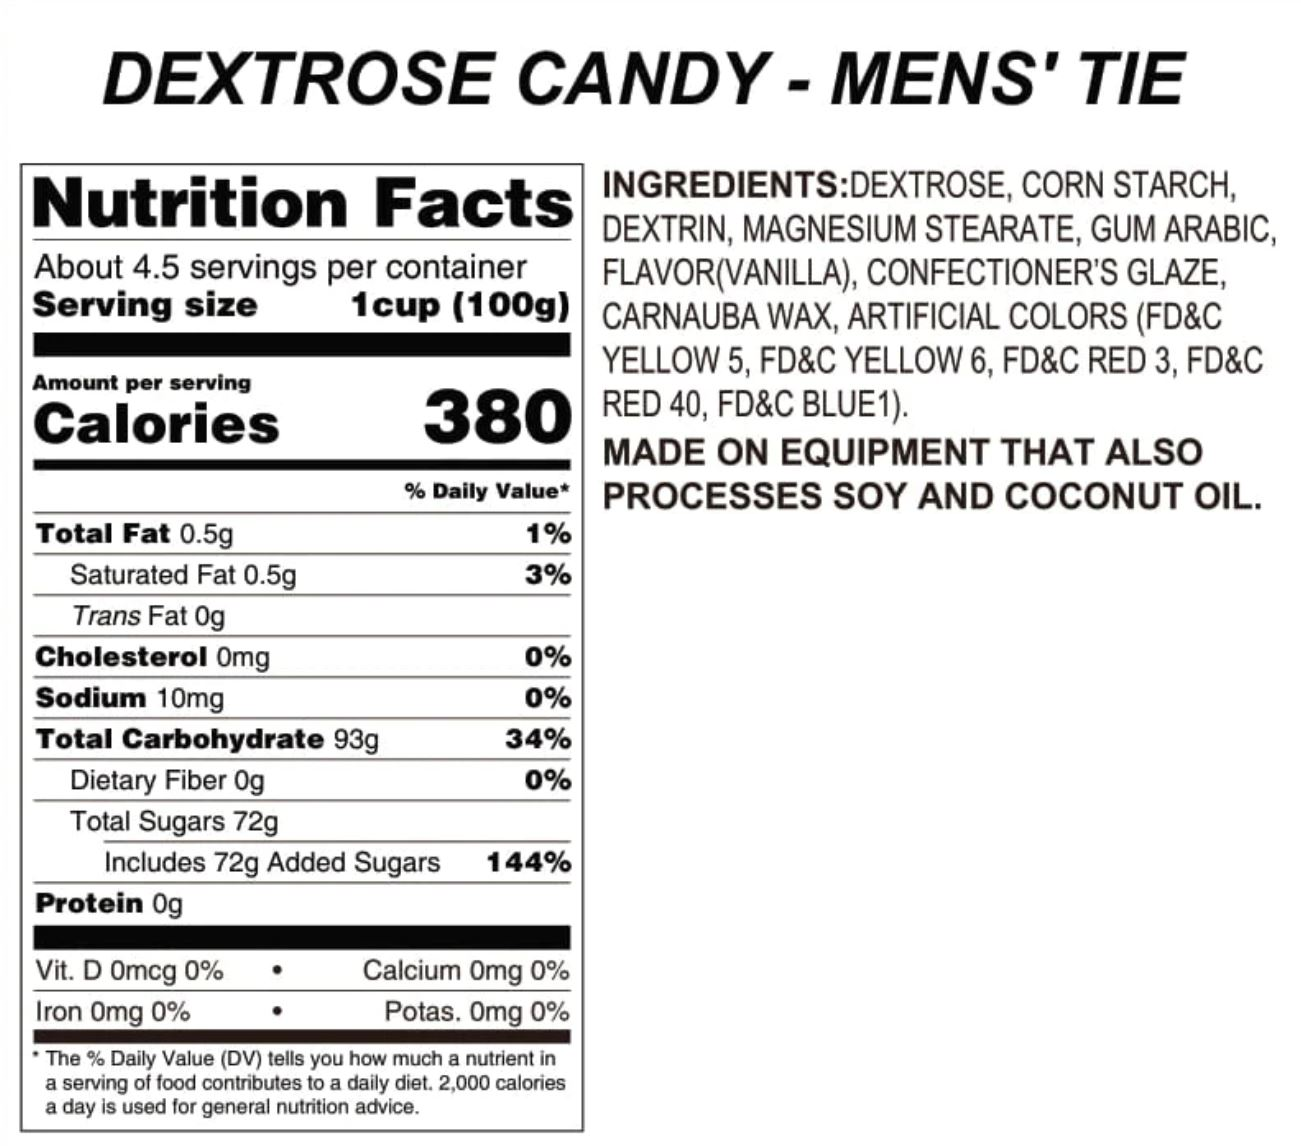 Men's Tie Candy Topping